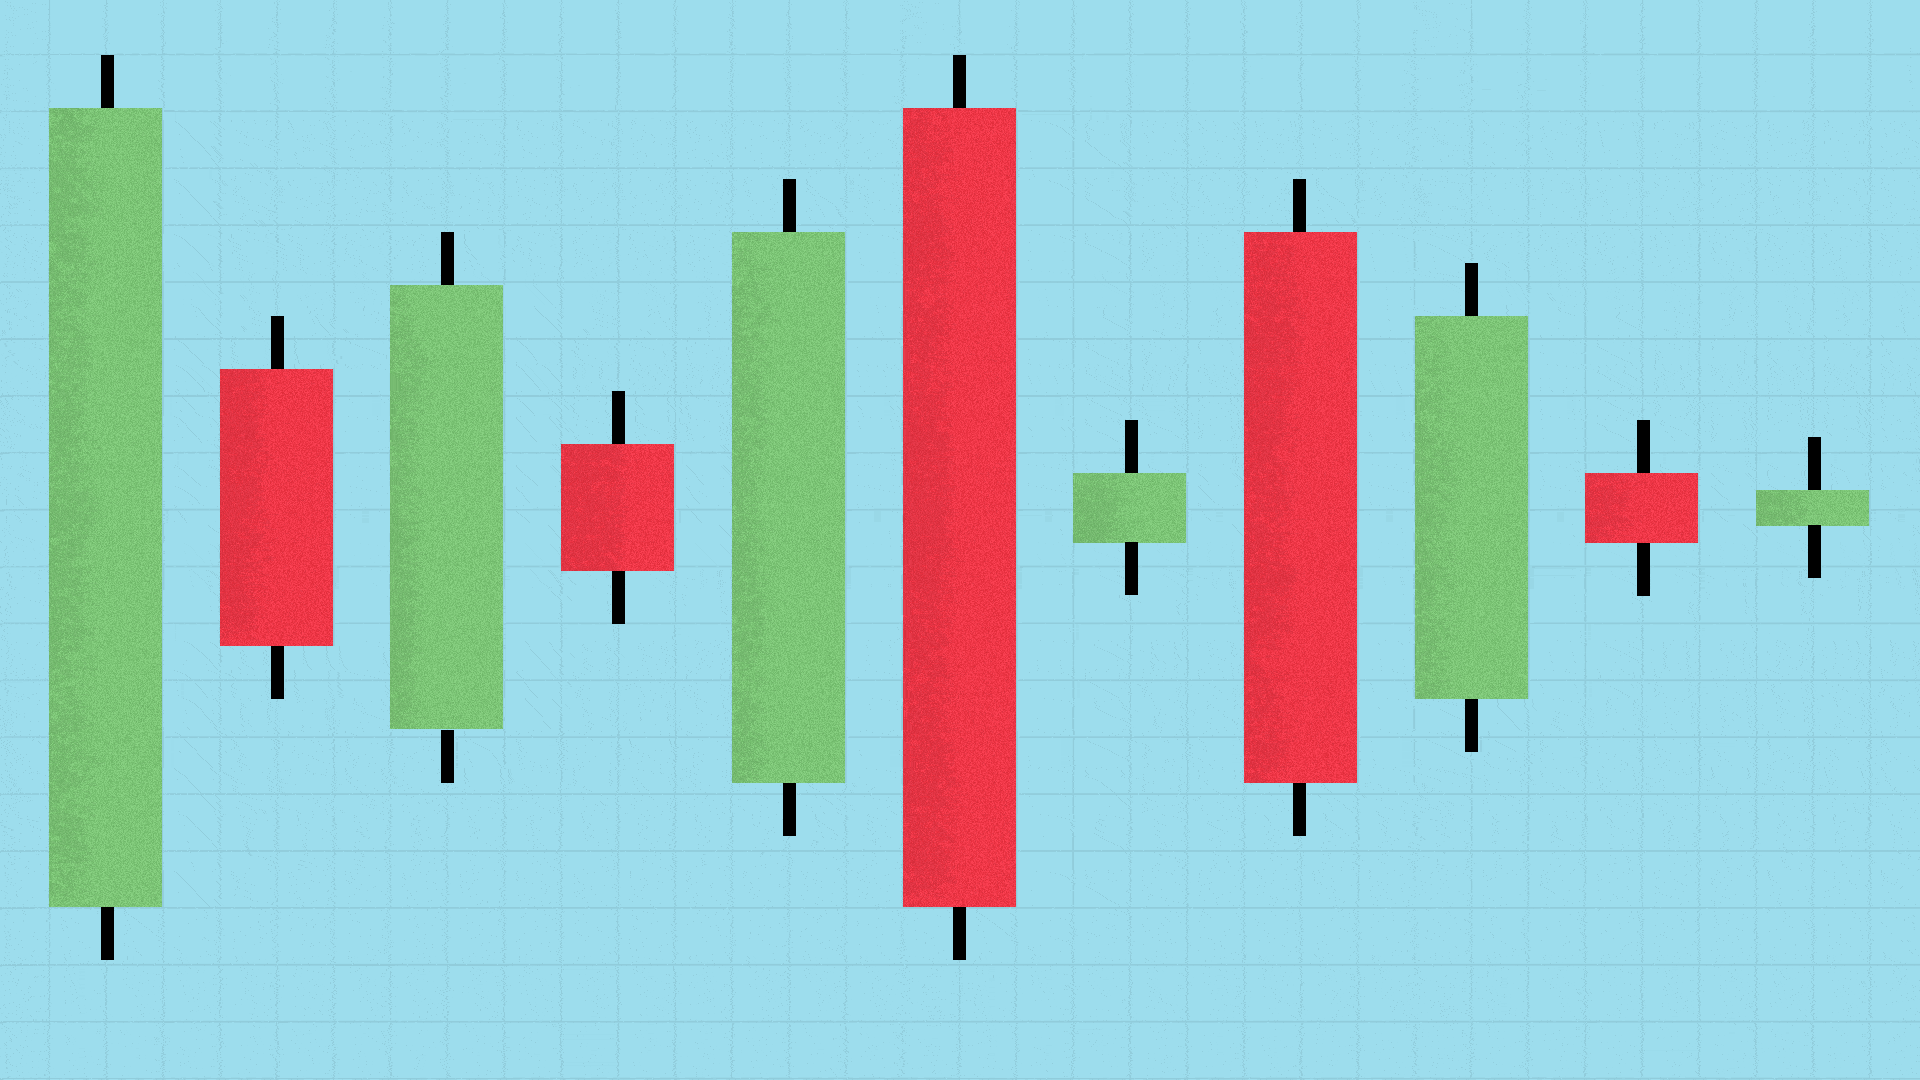 Animated illustration of a moving stock chart